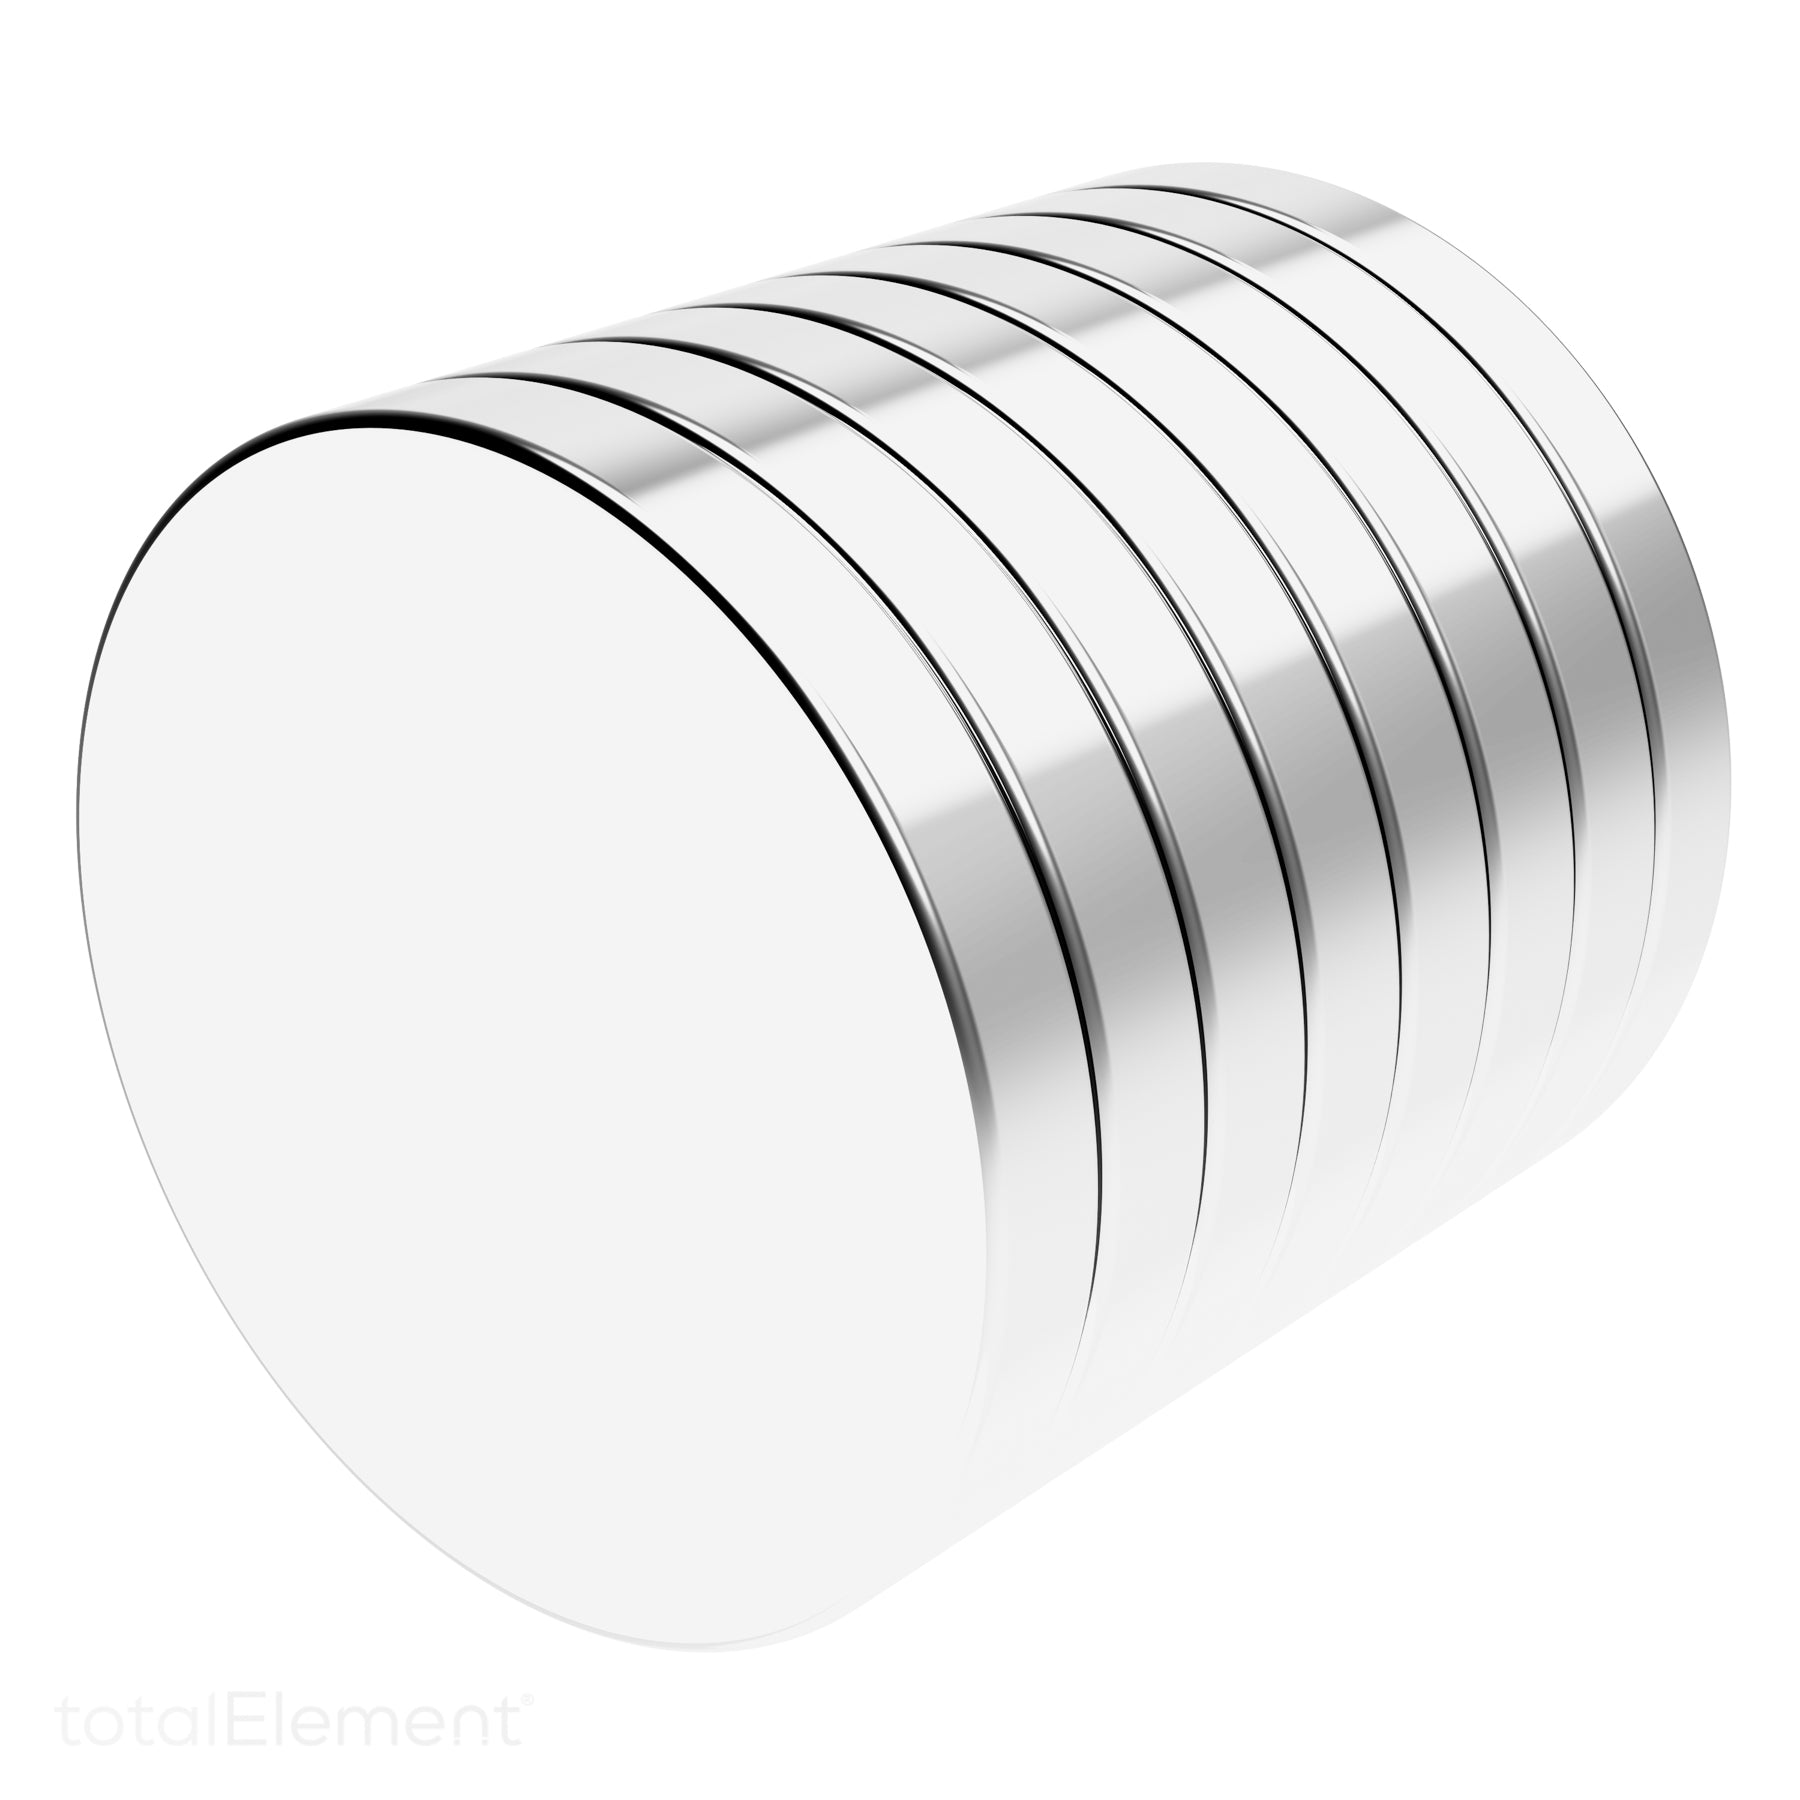 Strong Neodymium Magnetic Block, Small Magnets